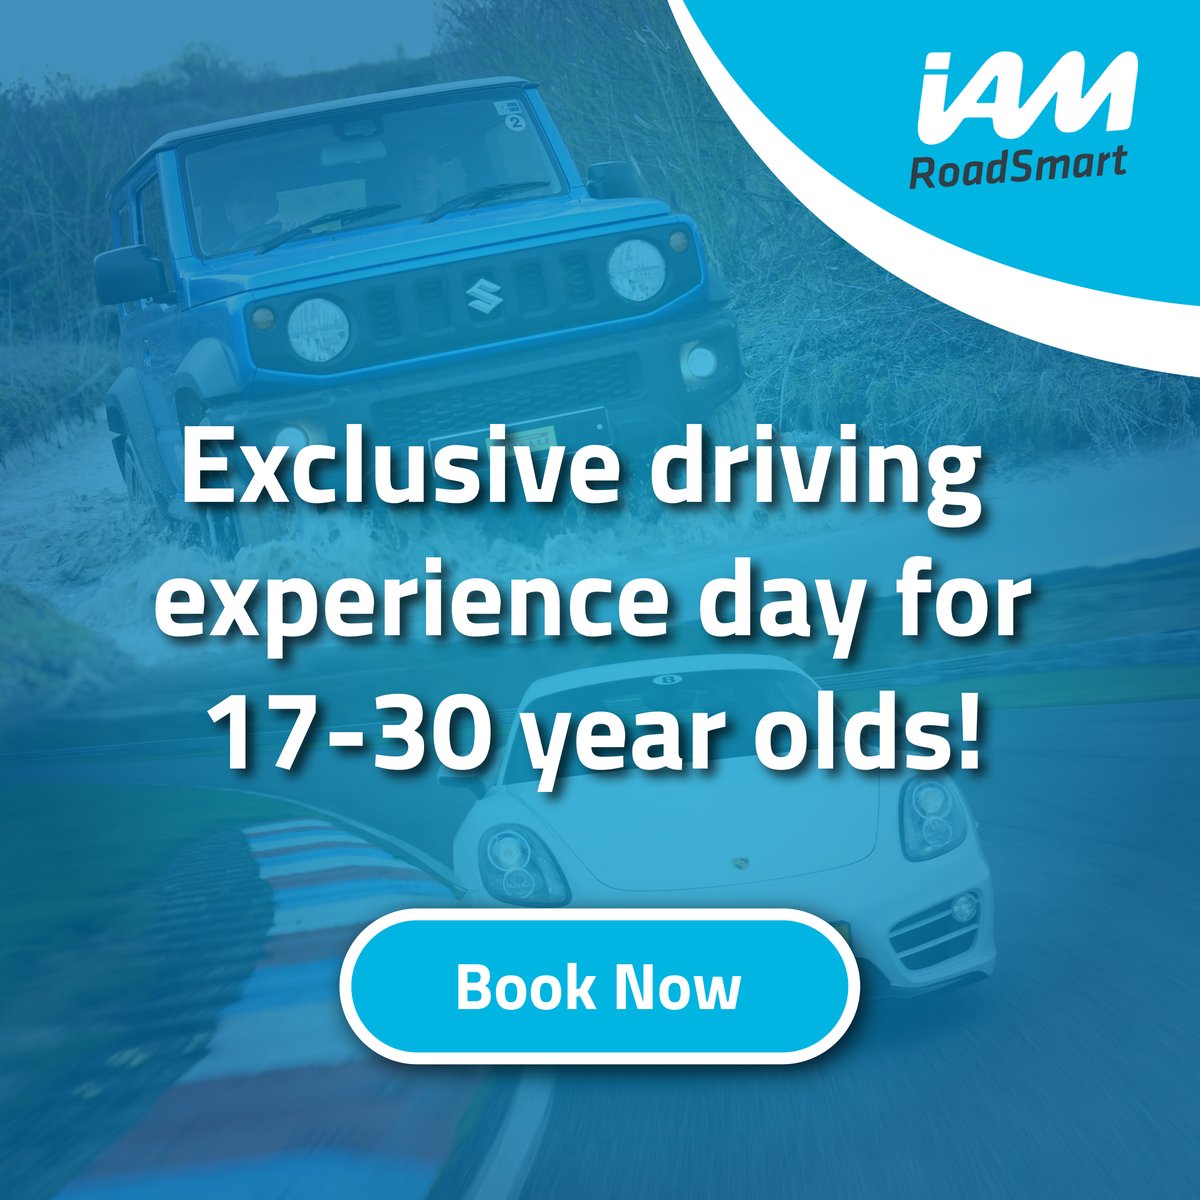 📣 ON SALE NOW! 📣 Tickets are now on sale for our first Young Driver Skills Day! This unique experience allows 17-30-year-olds to learn new skills and gain additional driving knowledge via a thrilling half-day experience at Thruxton Circuit. iamroadsmart.net/yd-skills-day